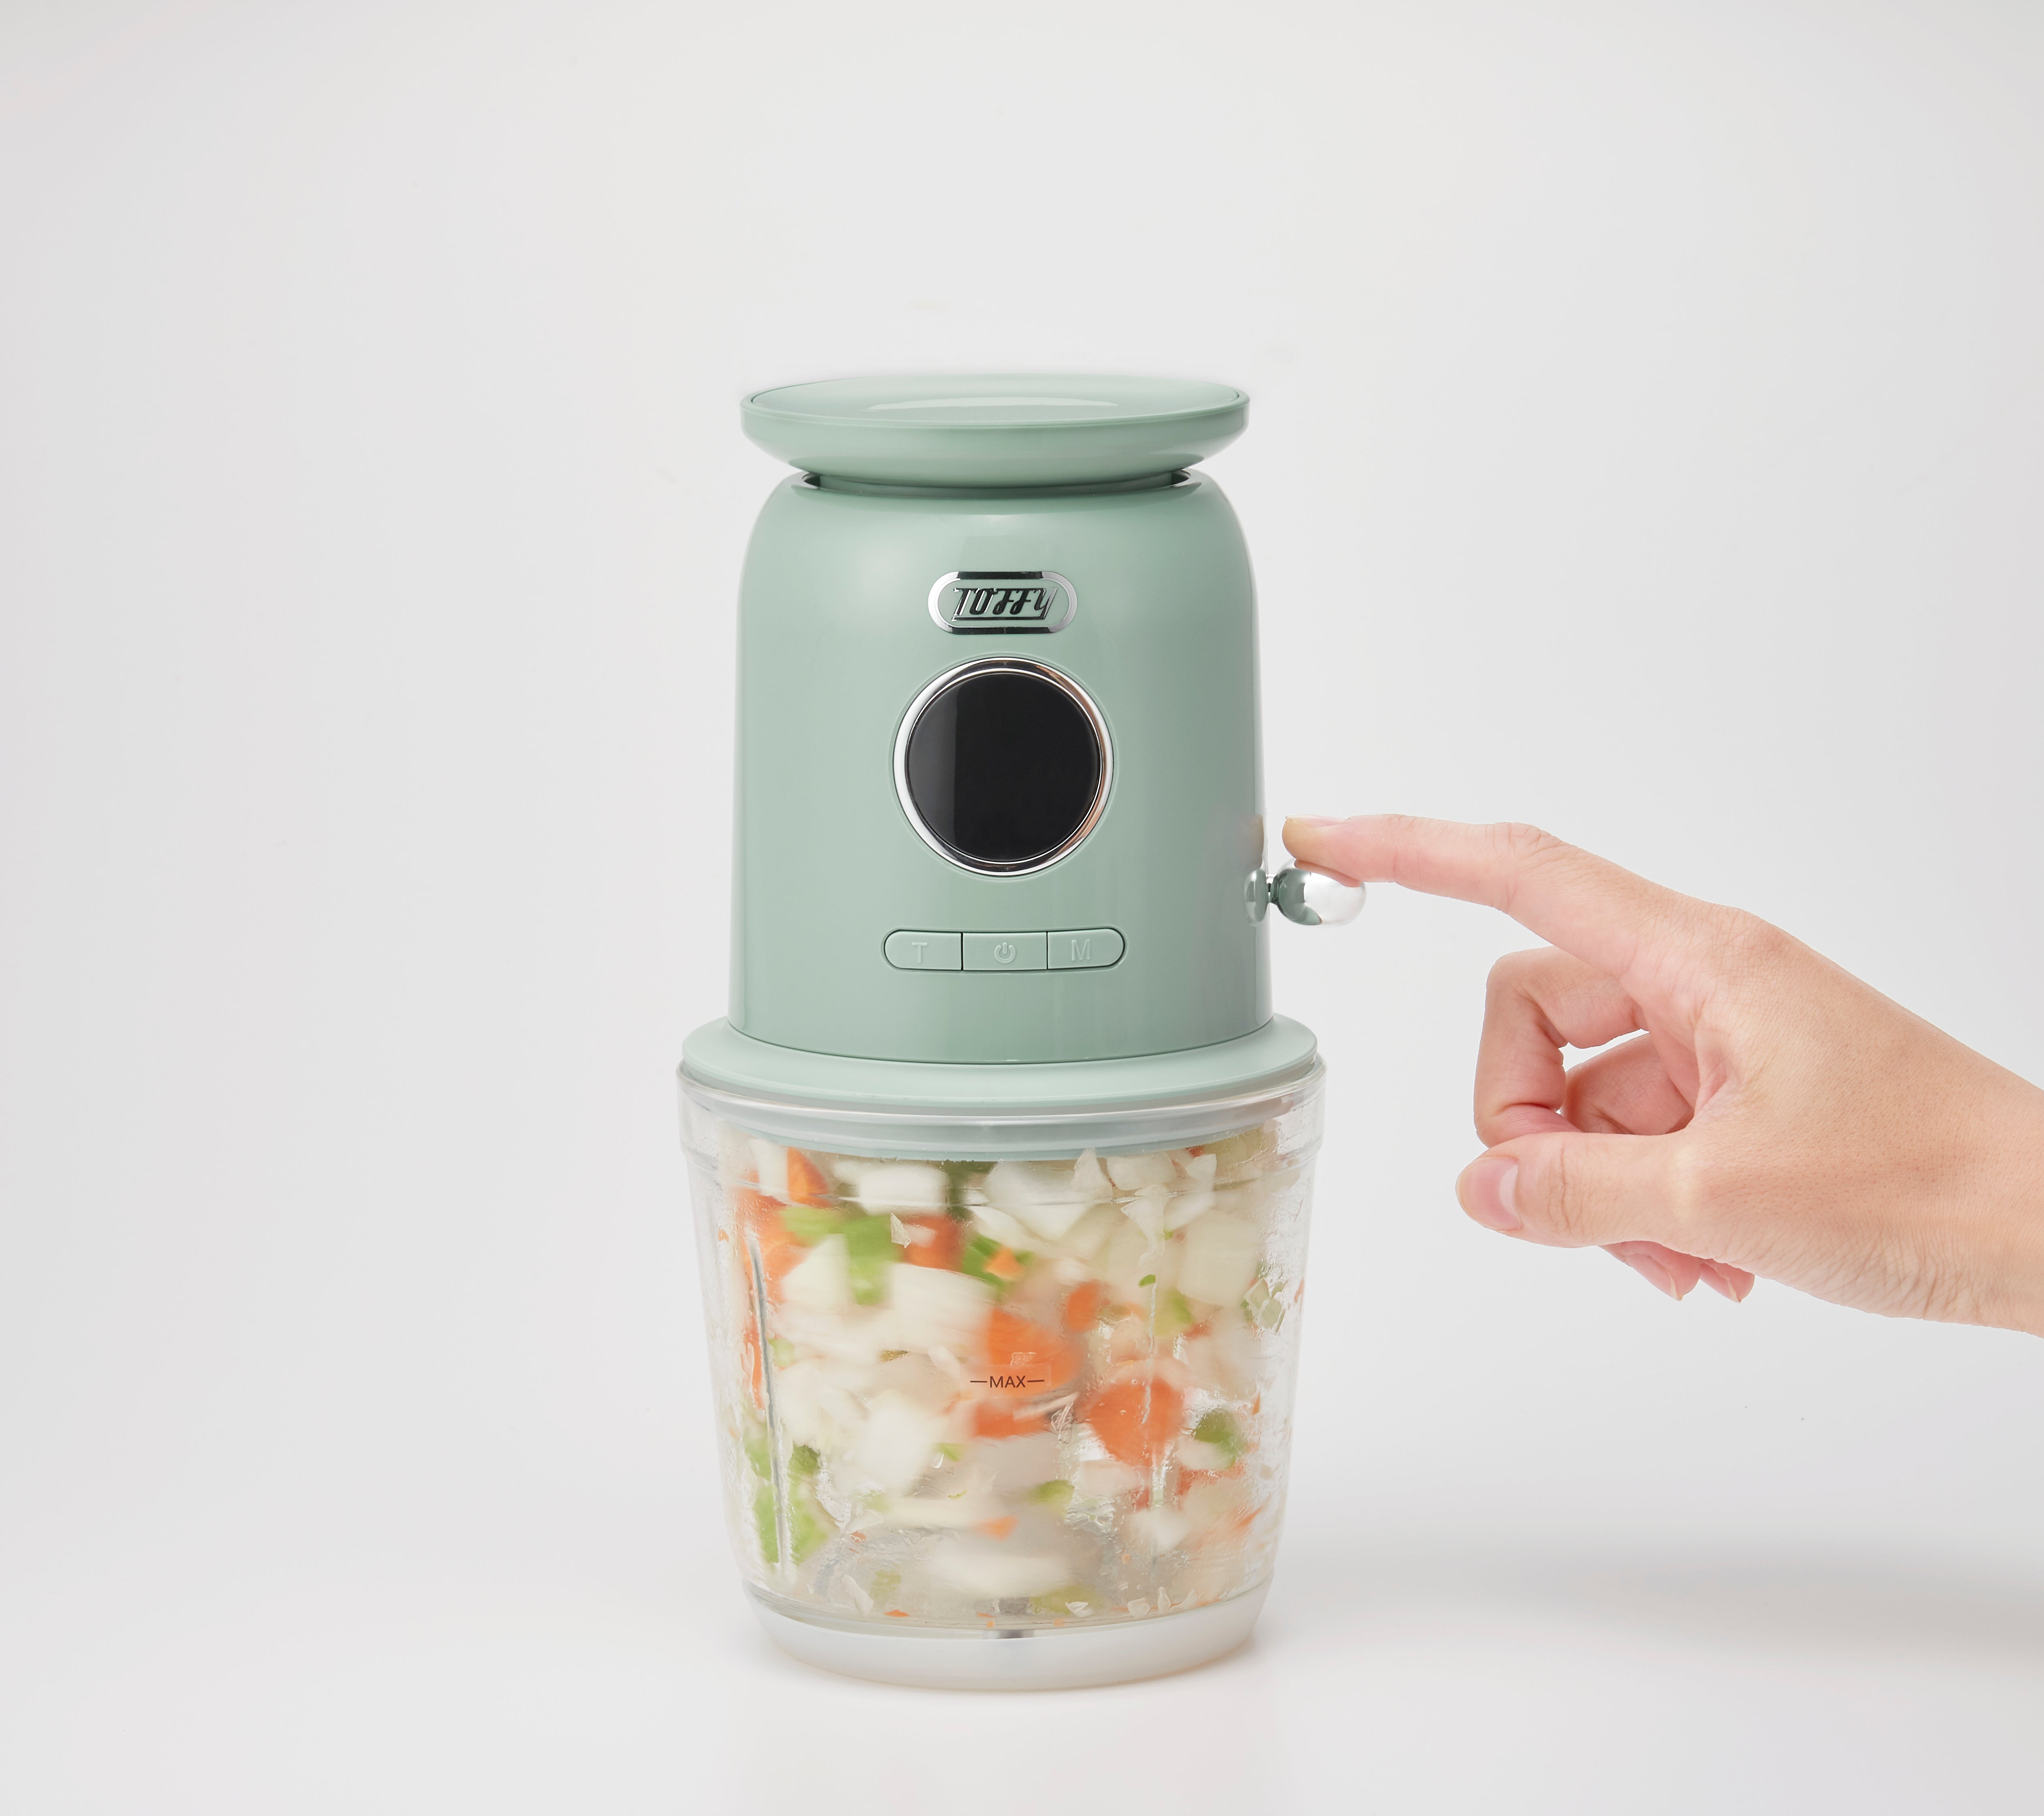 Toffy Rechargeable Weigh + Multi Food Processor 多功能無線秤重食物料理機 K-CH2-PA/ K-CH2-AW